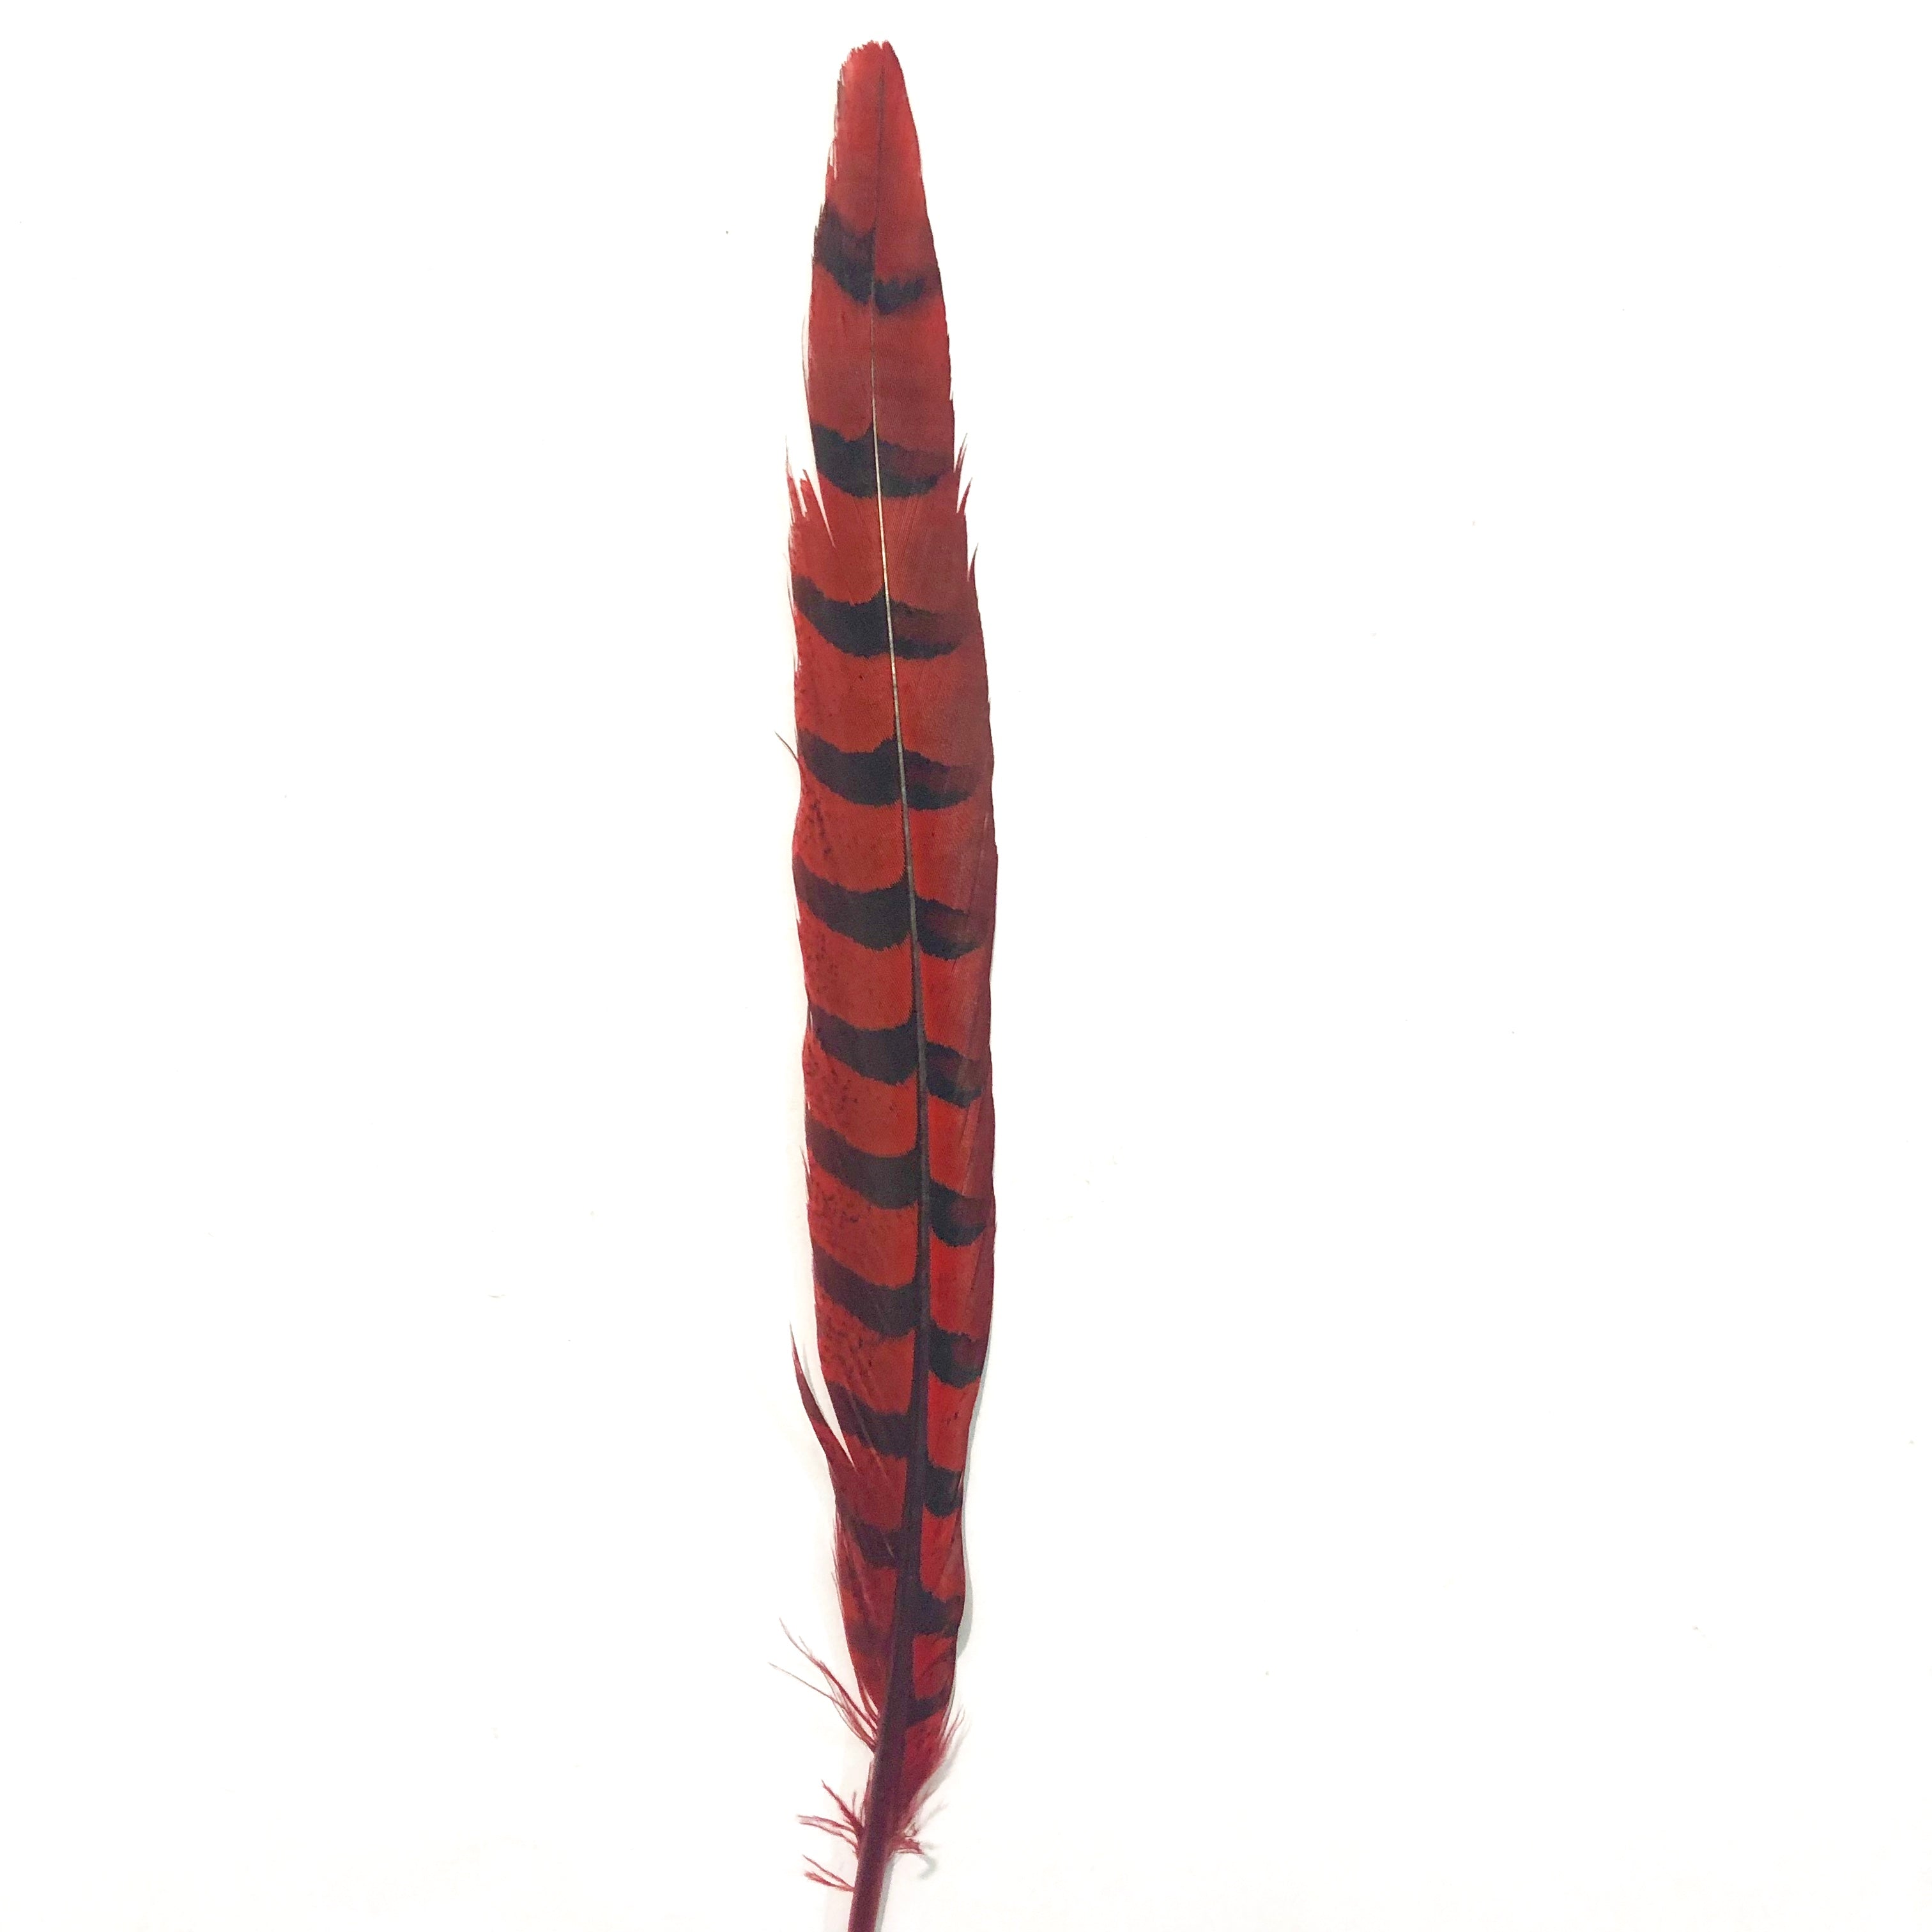 8" to 10" Reeves Pheasant Tail Feather - Red